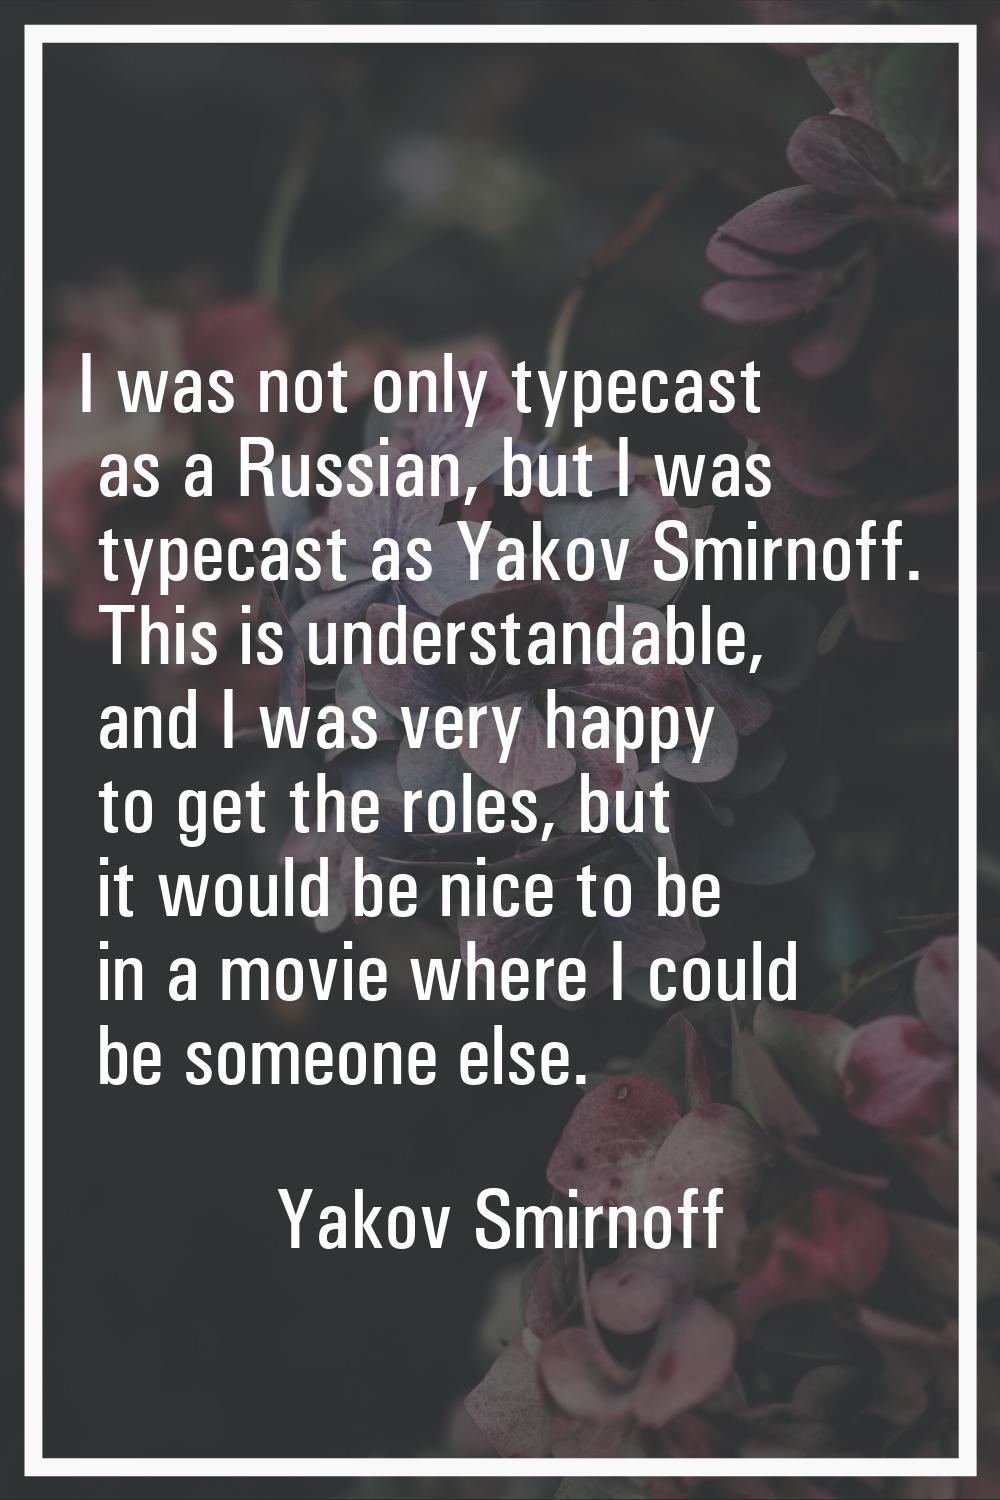 I was not only typecast as a Russian, but I was typecast as Yakov Smirnoff. This is understandable,